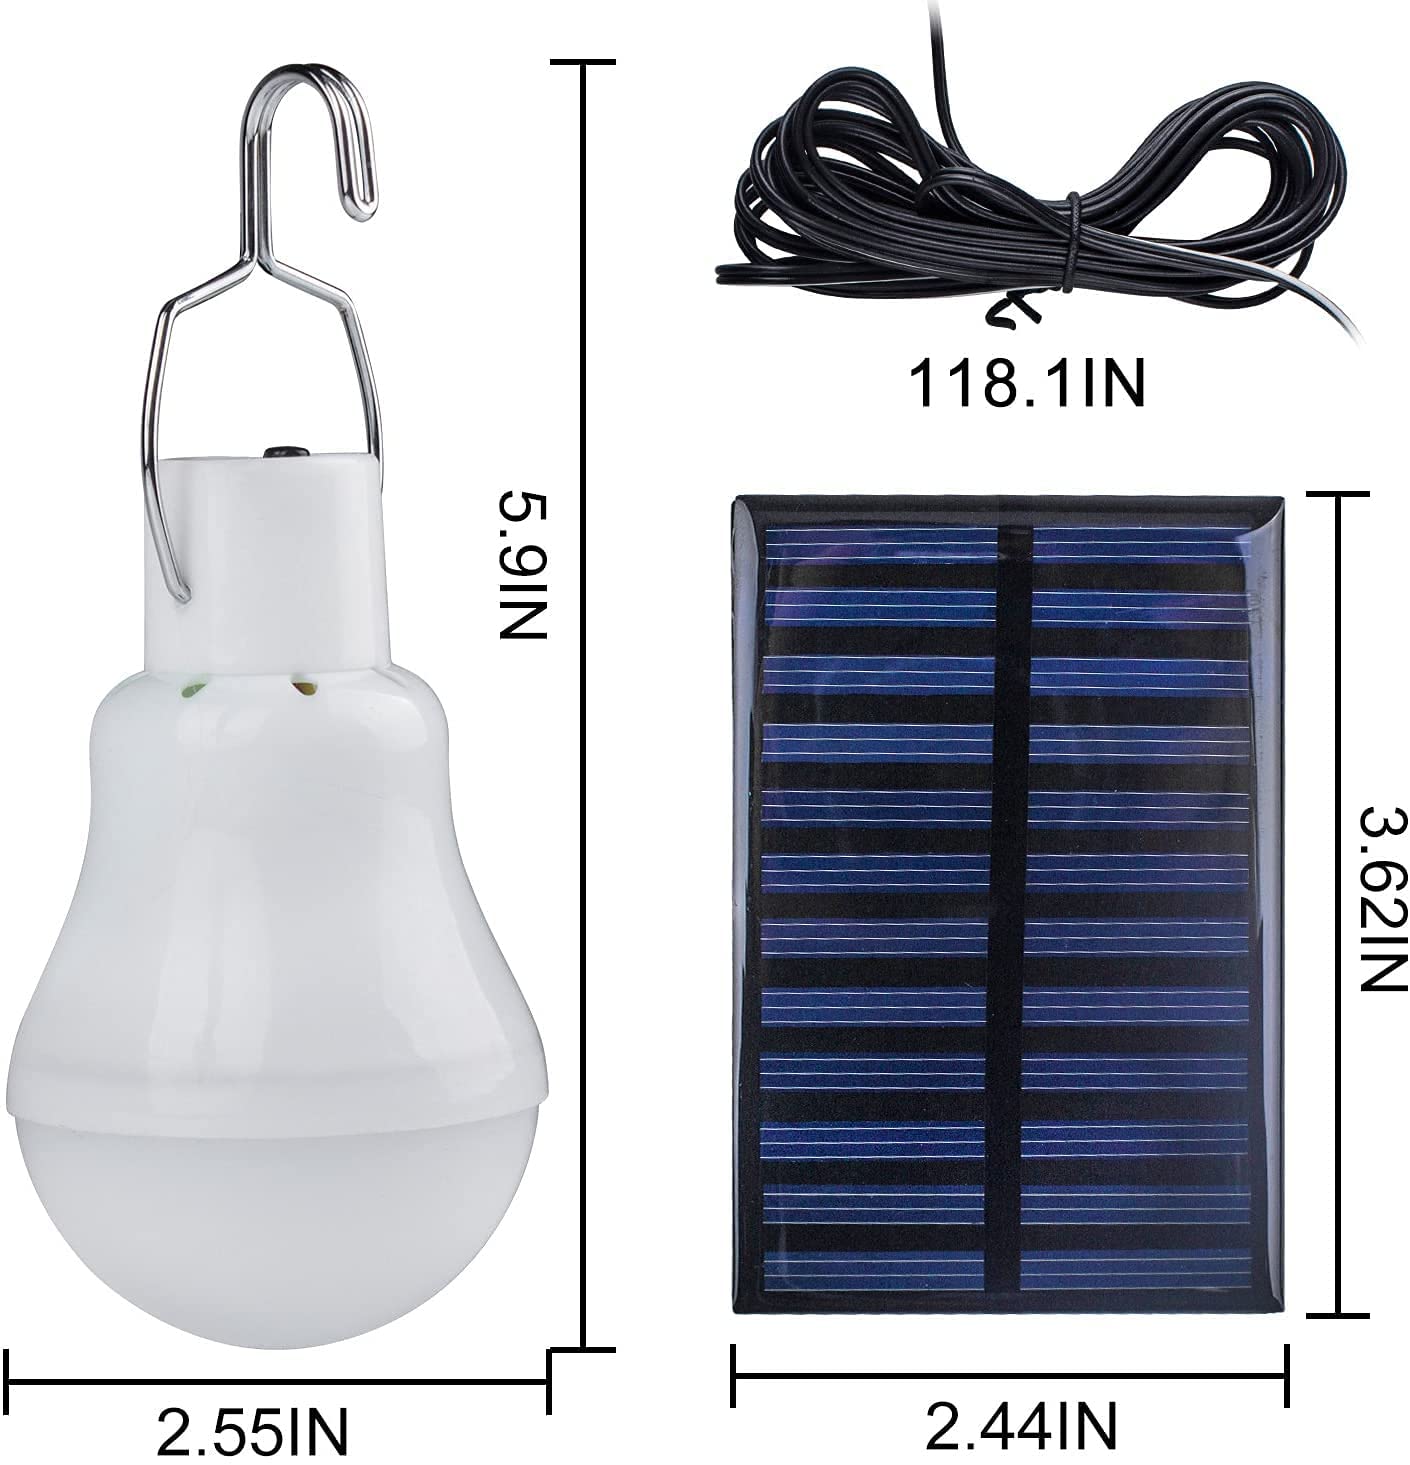 LED Solar Bulb Light Waterproof Outdoor 5V USB Charged Hanging Emergency Sunlight Powered Lamp Portable Powerful Indoor House